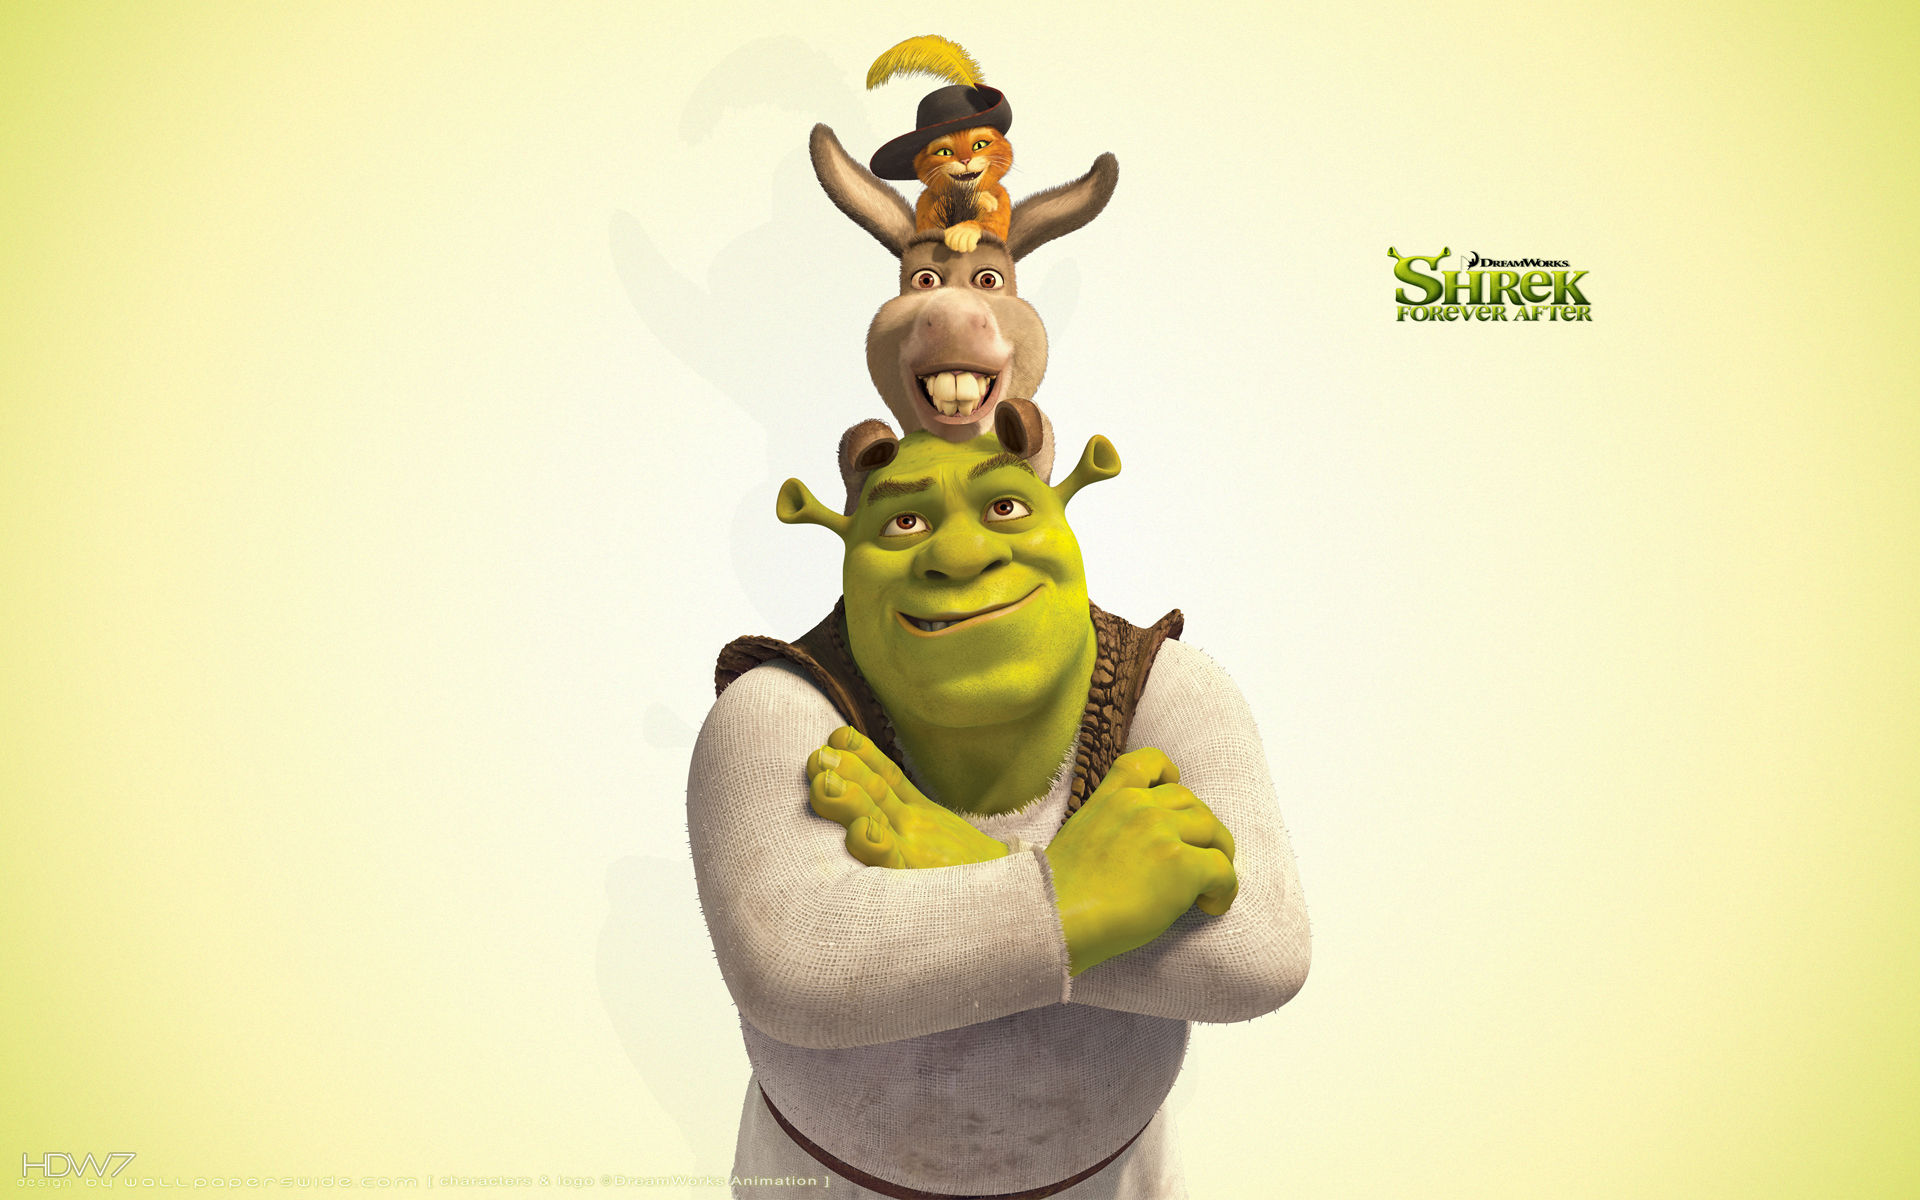 30+ Shrek HD Wallpapers and Backgrounds